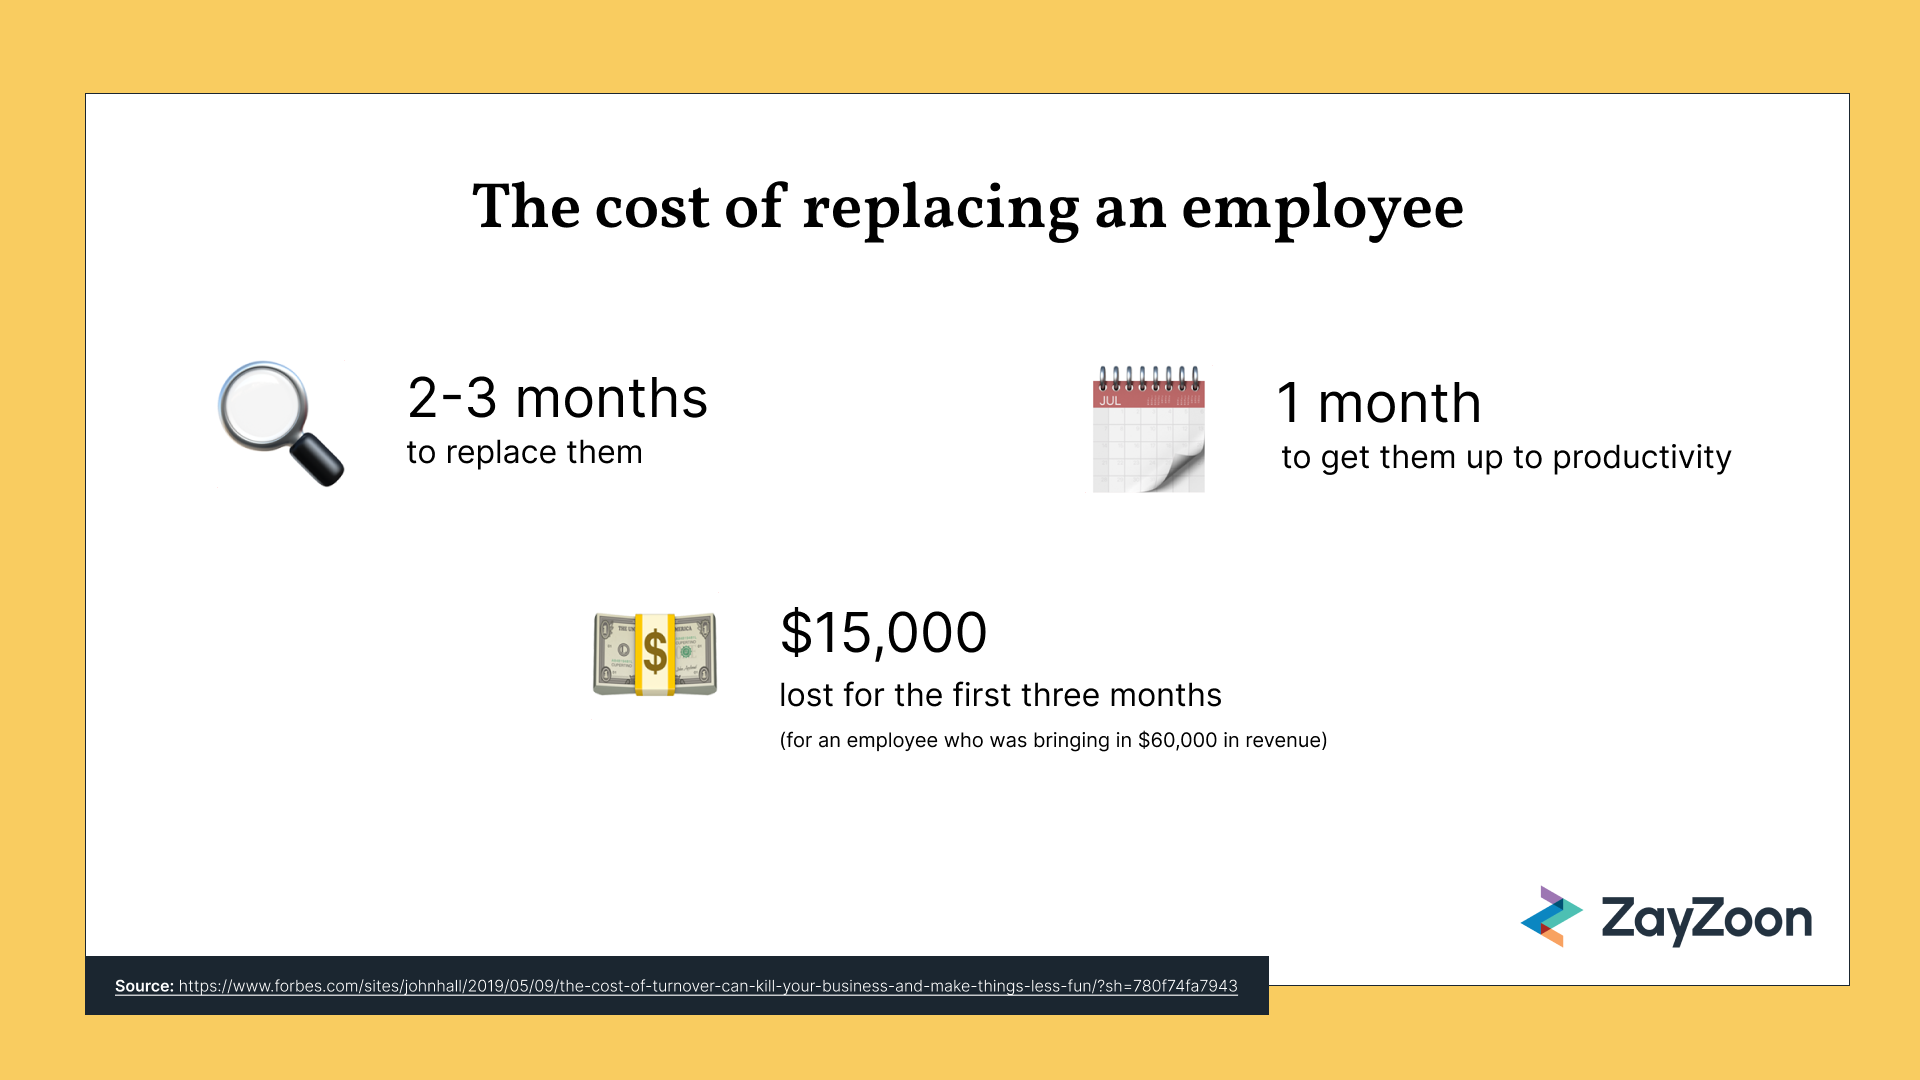 Visualizing the associated costs of replacing an employee.